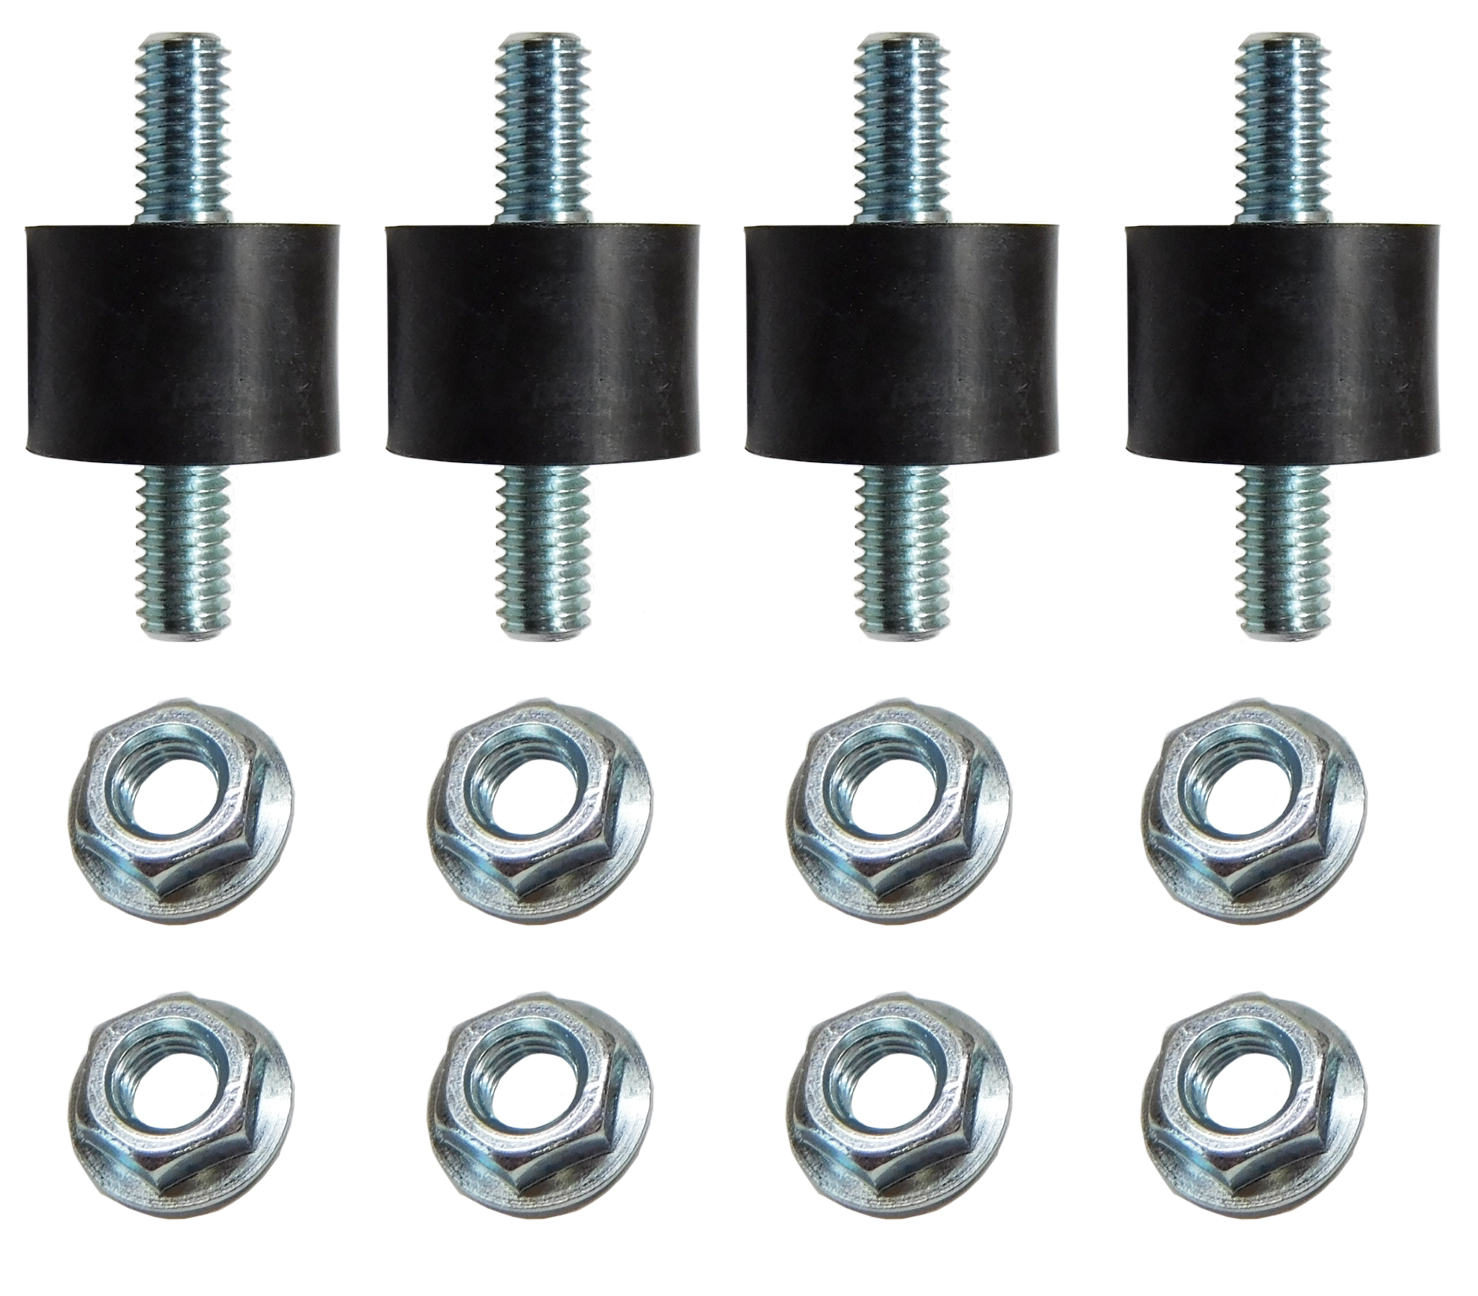 1964 Chevrolet Nova/Chevy II AIR CONDITIONING MOUNTING STUD INSULATOR (THIS IS THE 3/4'' ROUND RUBBER INSULATOR WITH A 5/16'' STUD ON EACH END) - KIT (4 PIECE) | AC1234Z